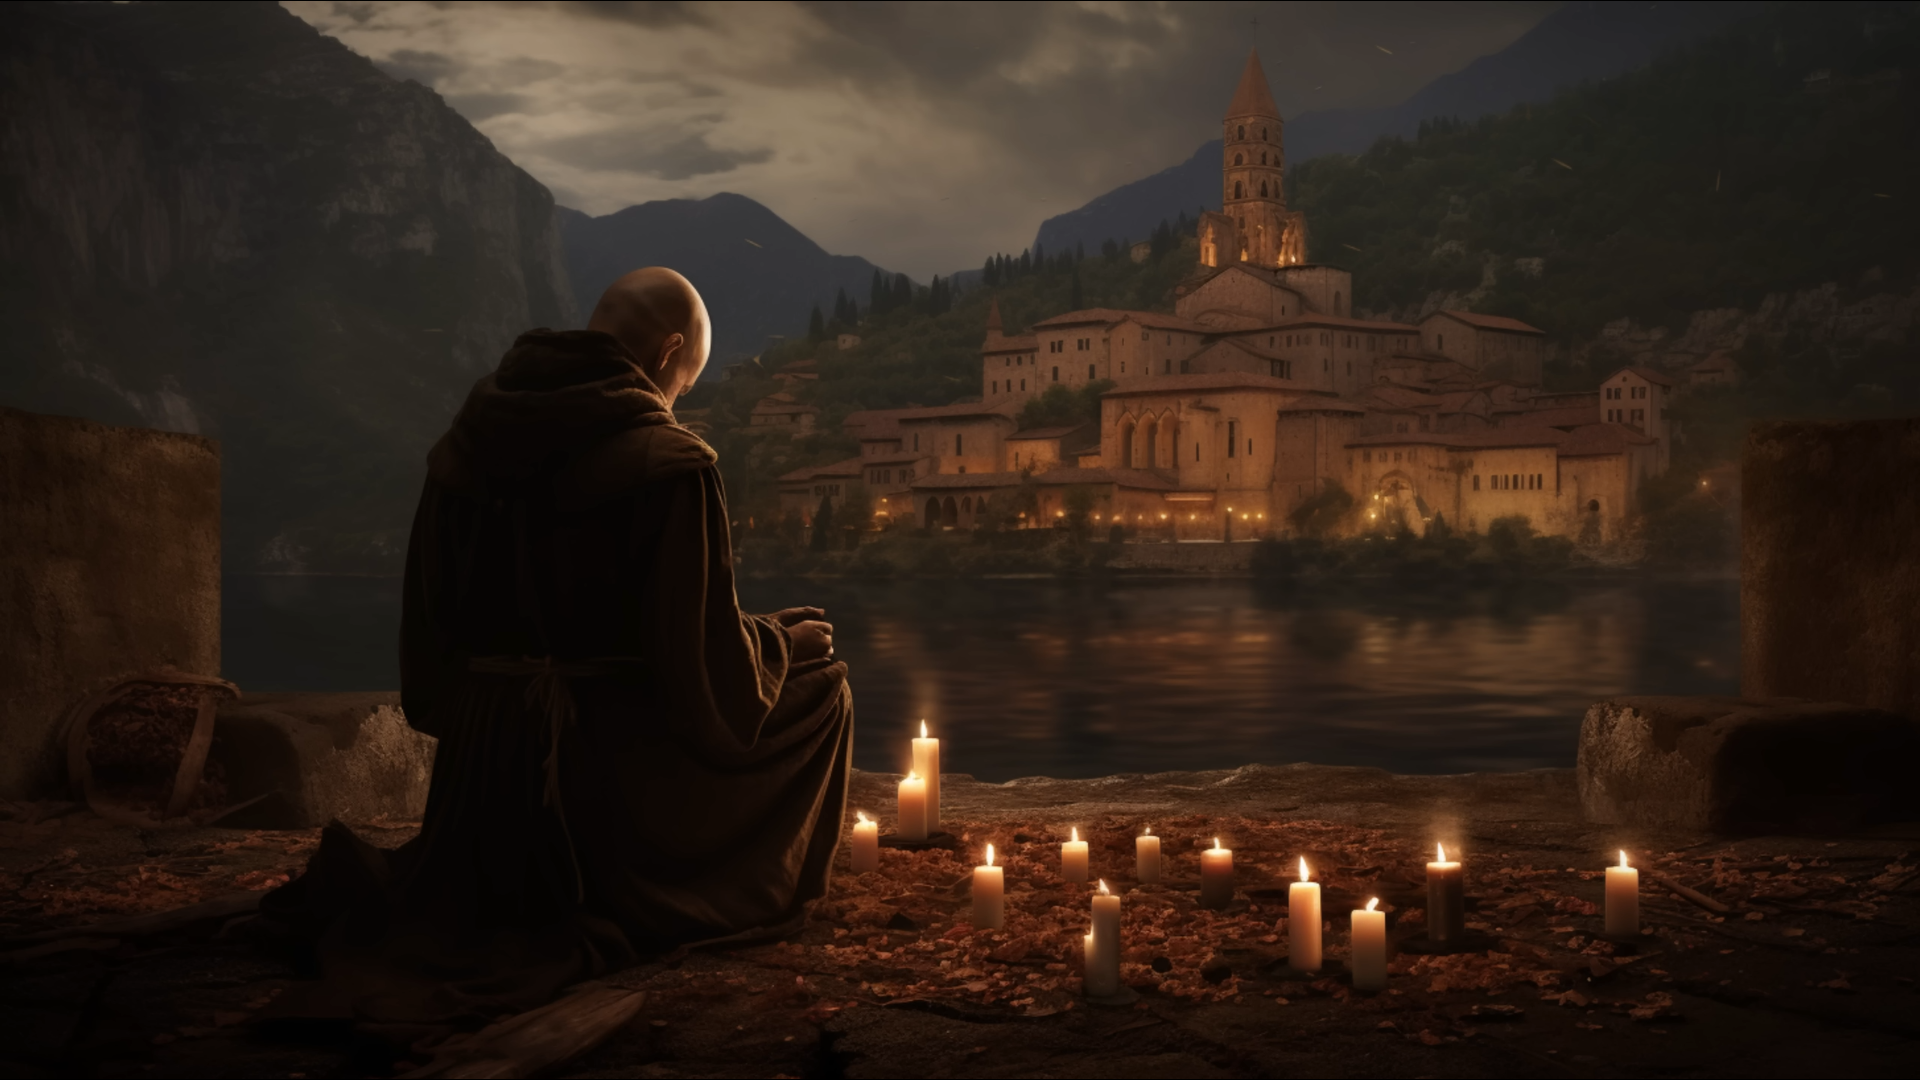 Prayer Lake Monastery Candles Lights Water Reflection Sky Clouds Building 1920x1080